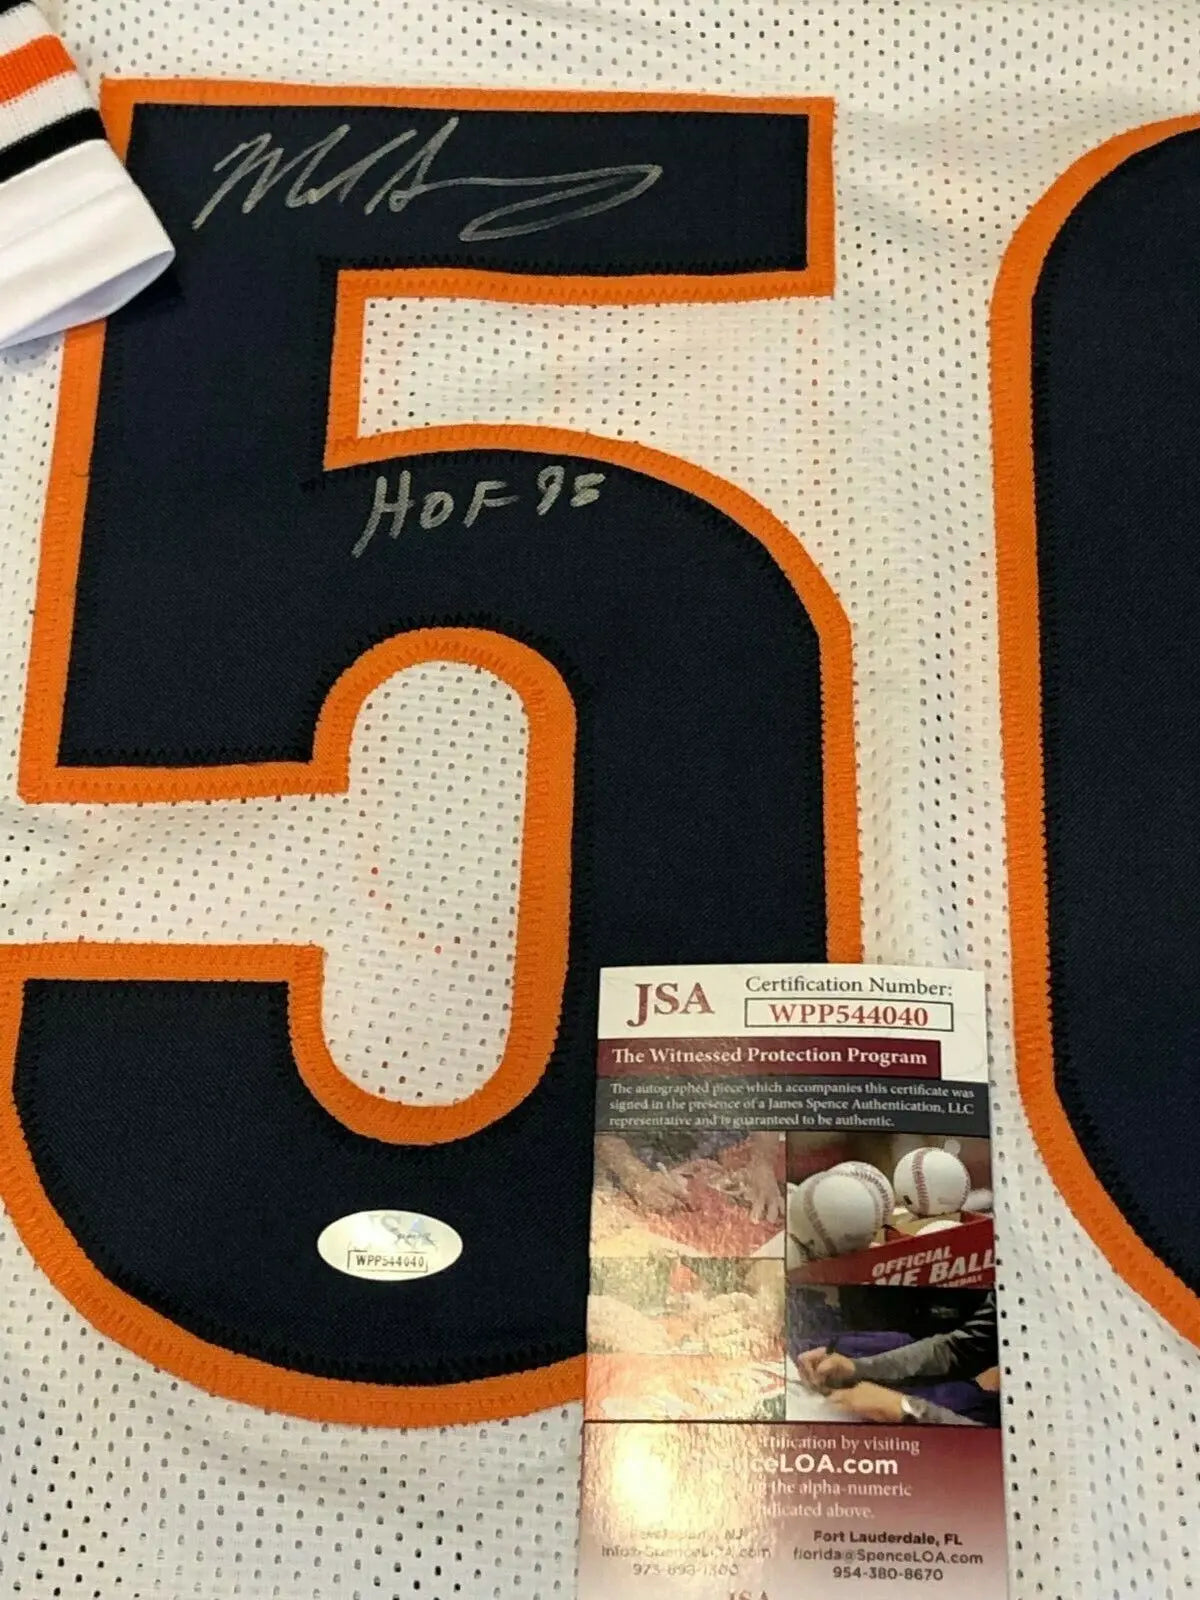 MVP Authentics Chicago Bears Mike Singletary Autographed Signed Inscribed Jersey Jsa Coa 107.10 sports jersey framing , jersey framing